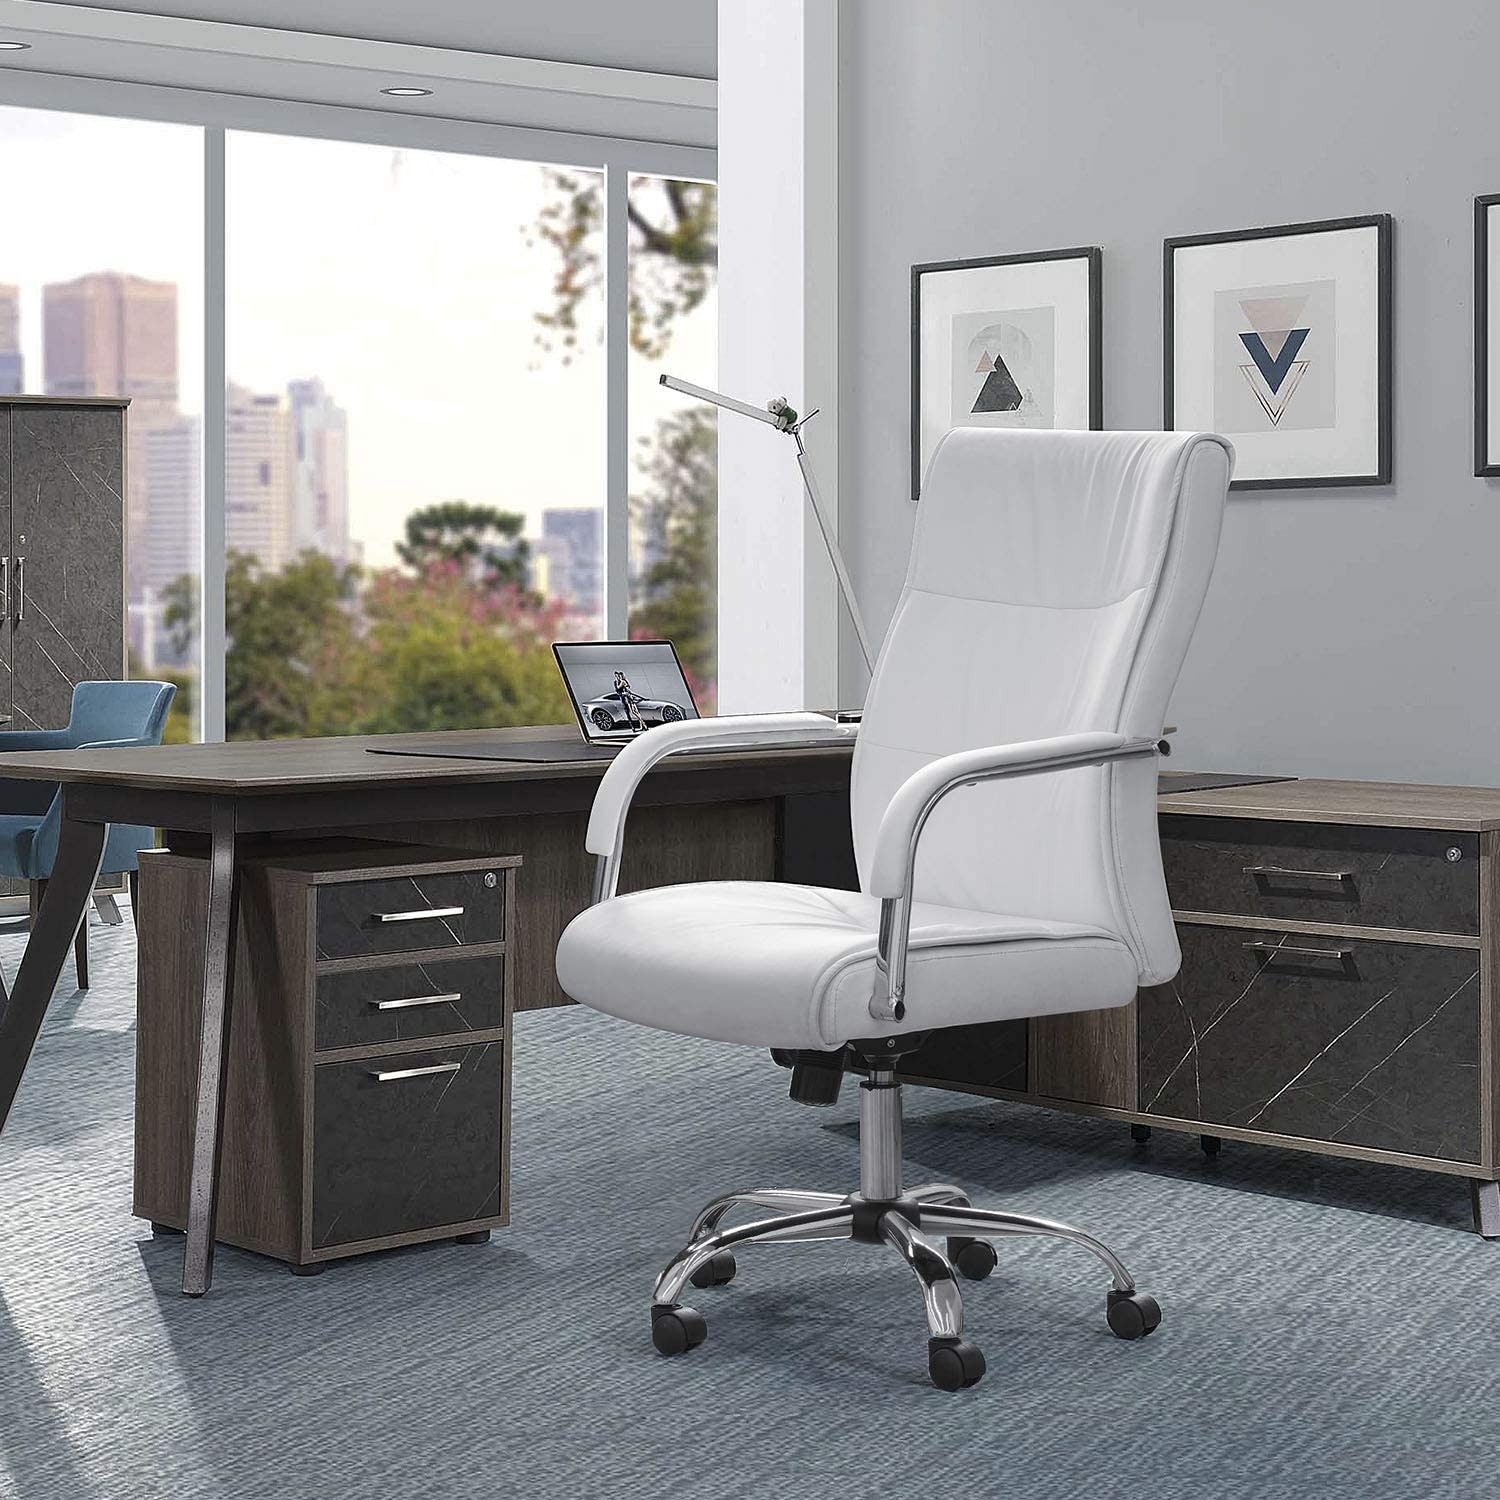 Top White Office Chair for Desk Will Bright Your Home Space